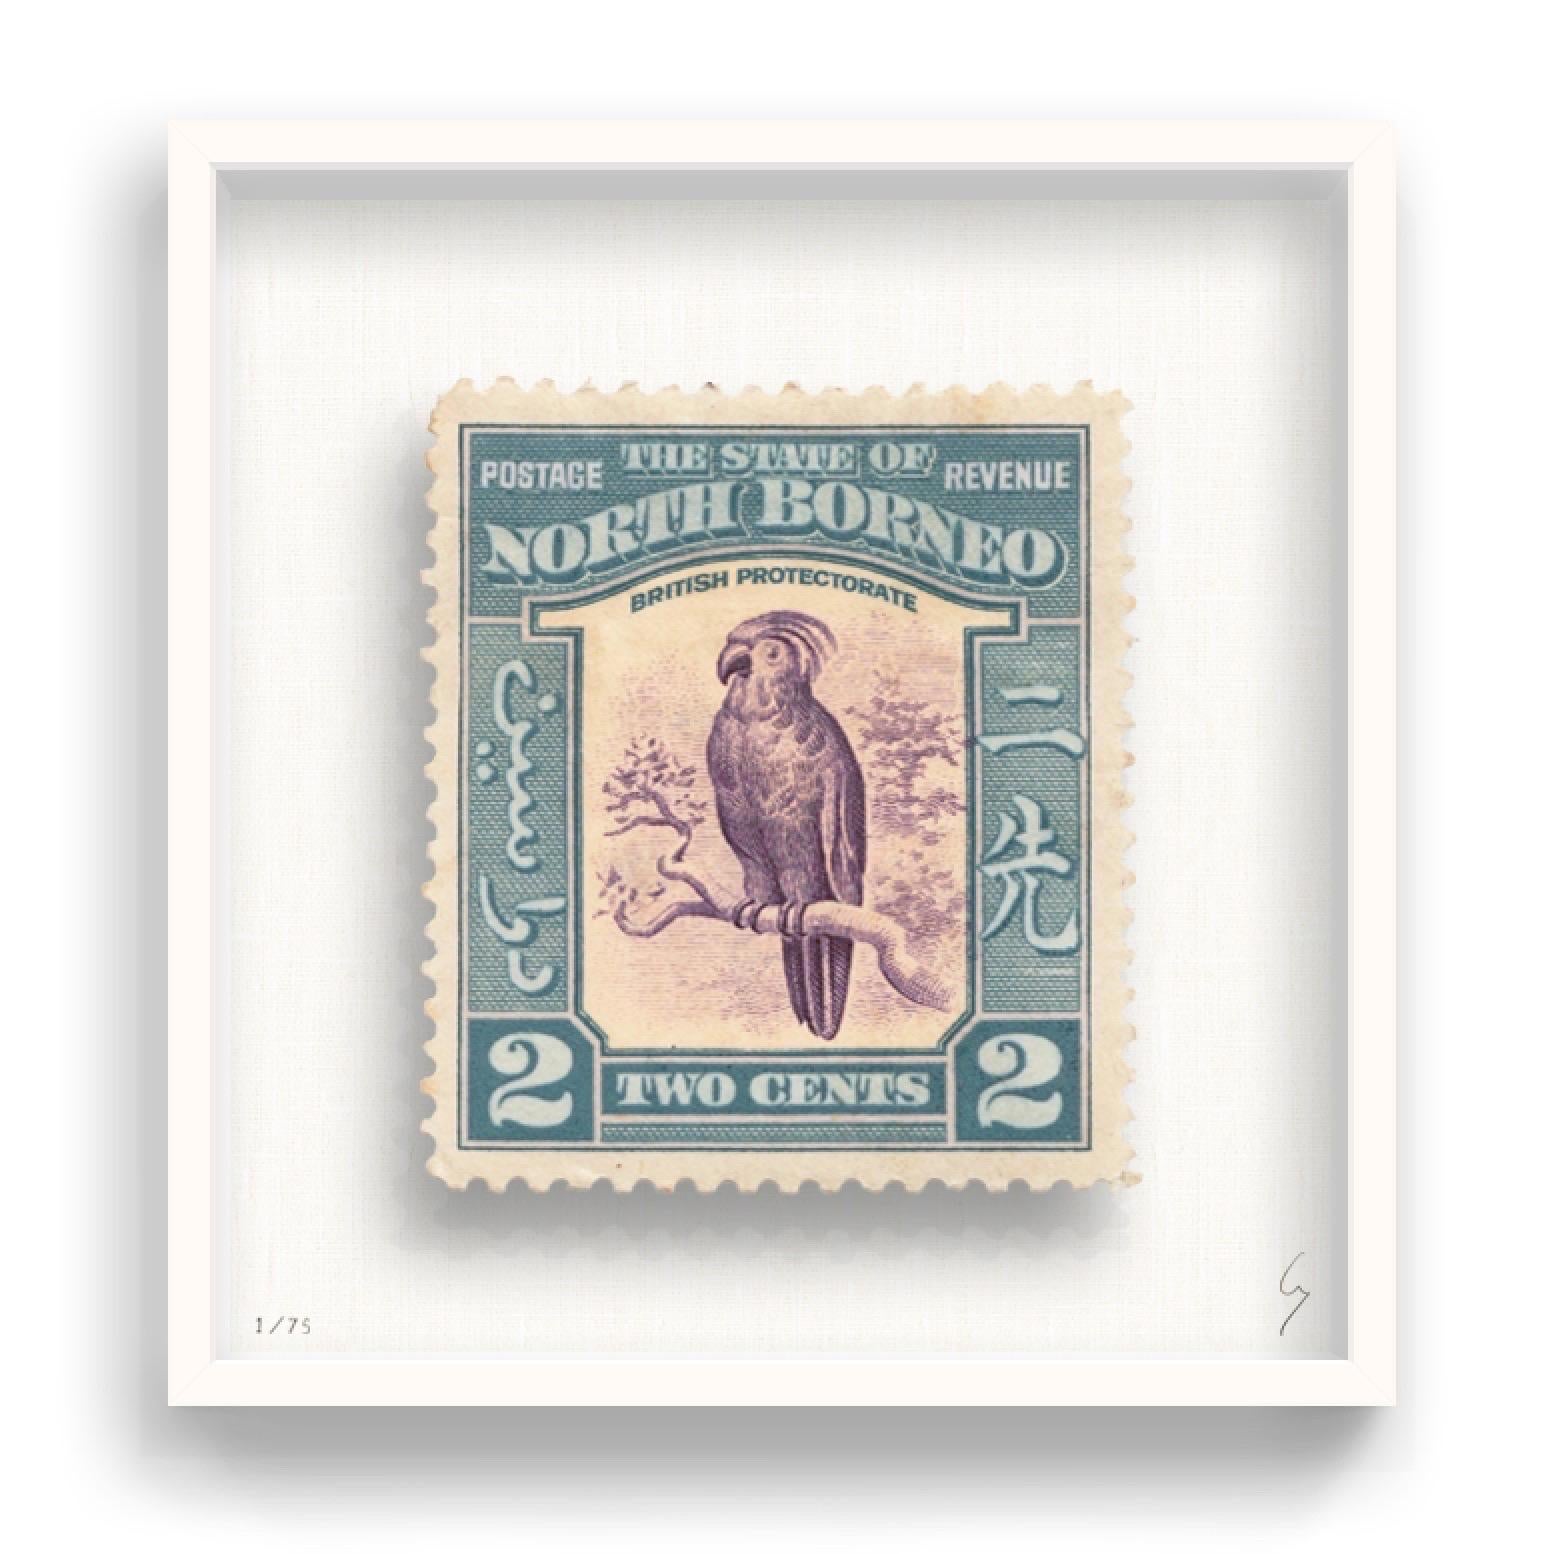 Guy Gee, Pakistan North Borneo (medium)

Hand-engraved print on 350gsm on G.F Smith card
31 x 35 cm (12 1/5 x 13 4/5)
Frame included 
Edition of 75 

Each artwork by Guy had been digitally reimagined from an original postage stamp. Cut out and